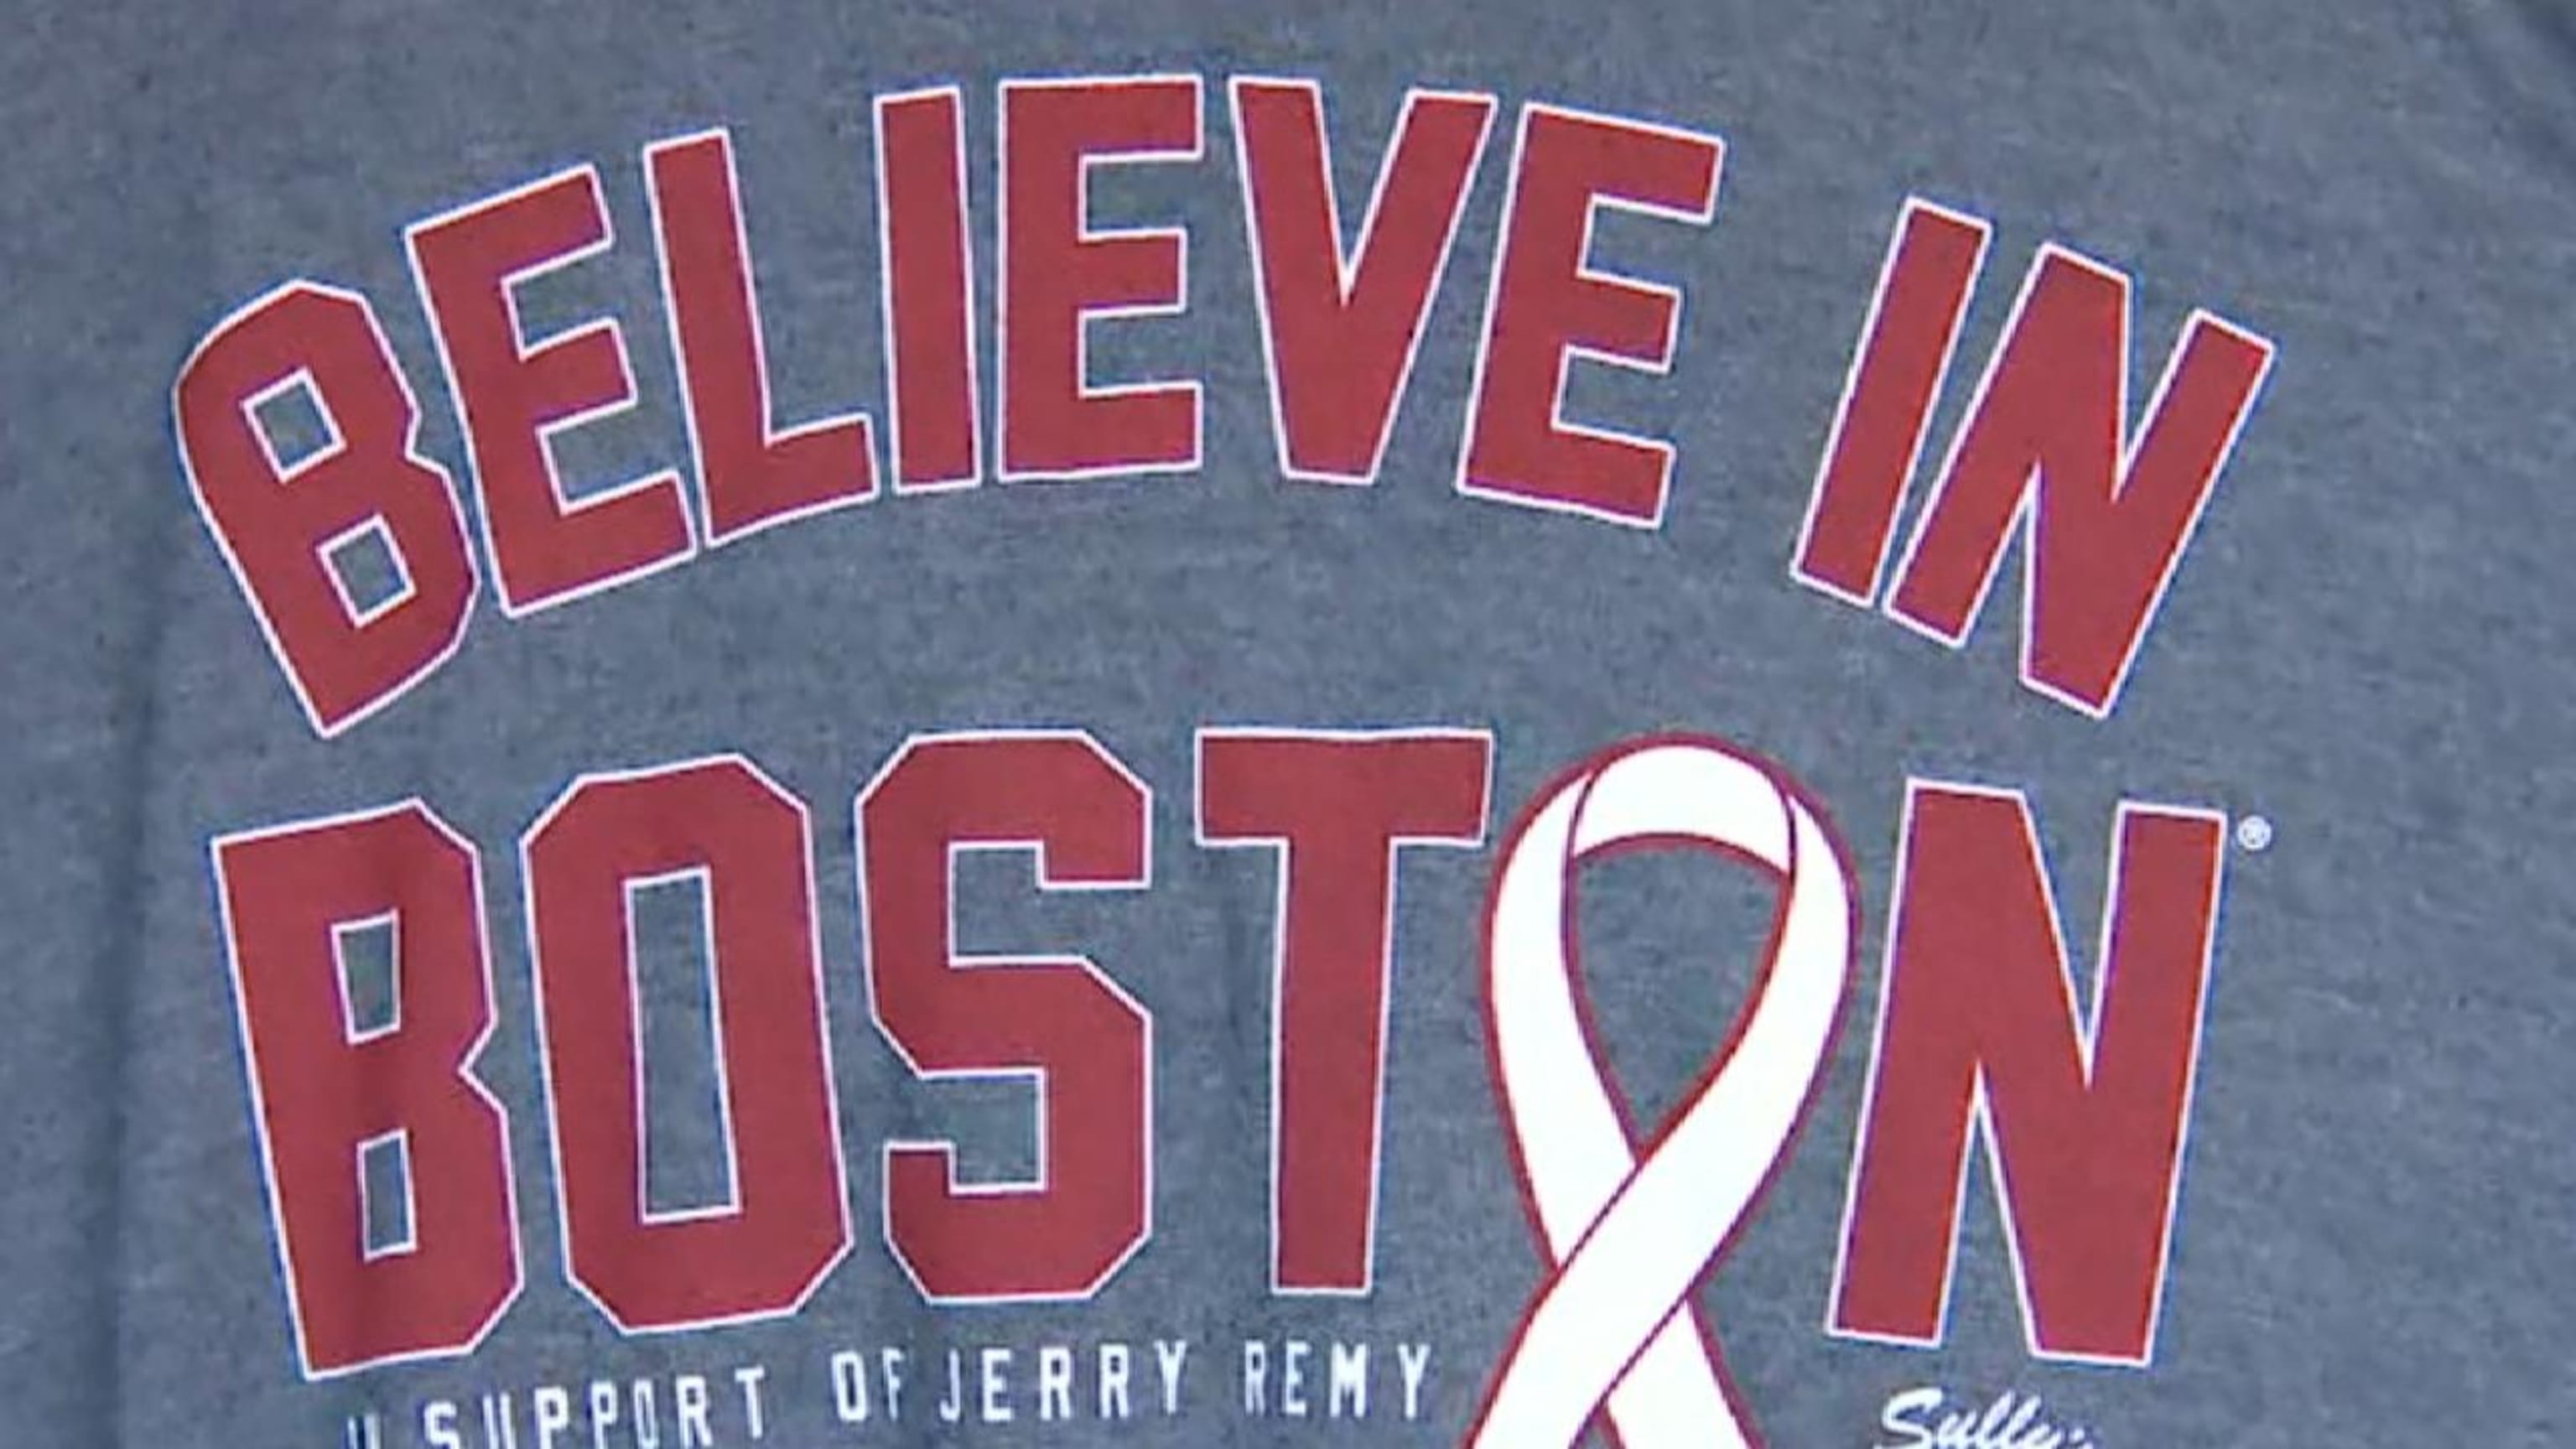 Jerry Remy's family thanks Red Sox fans for support